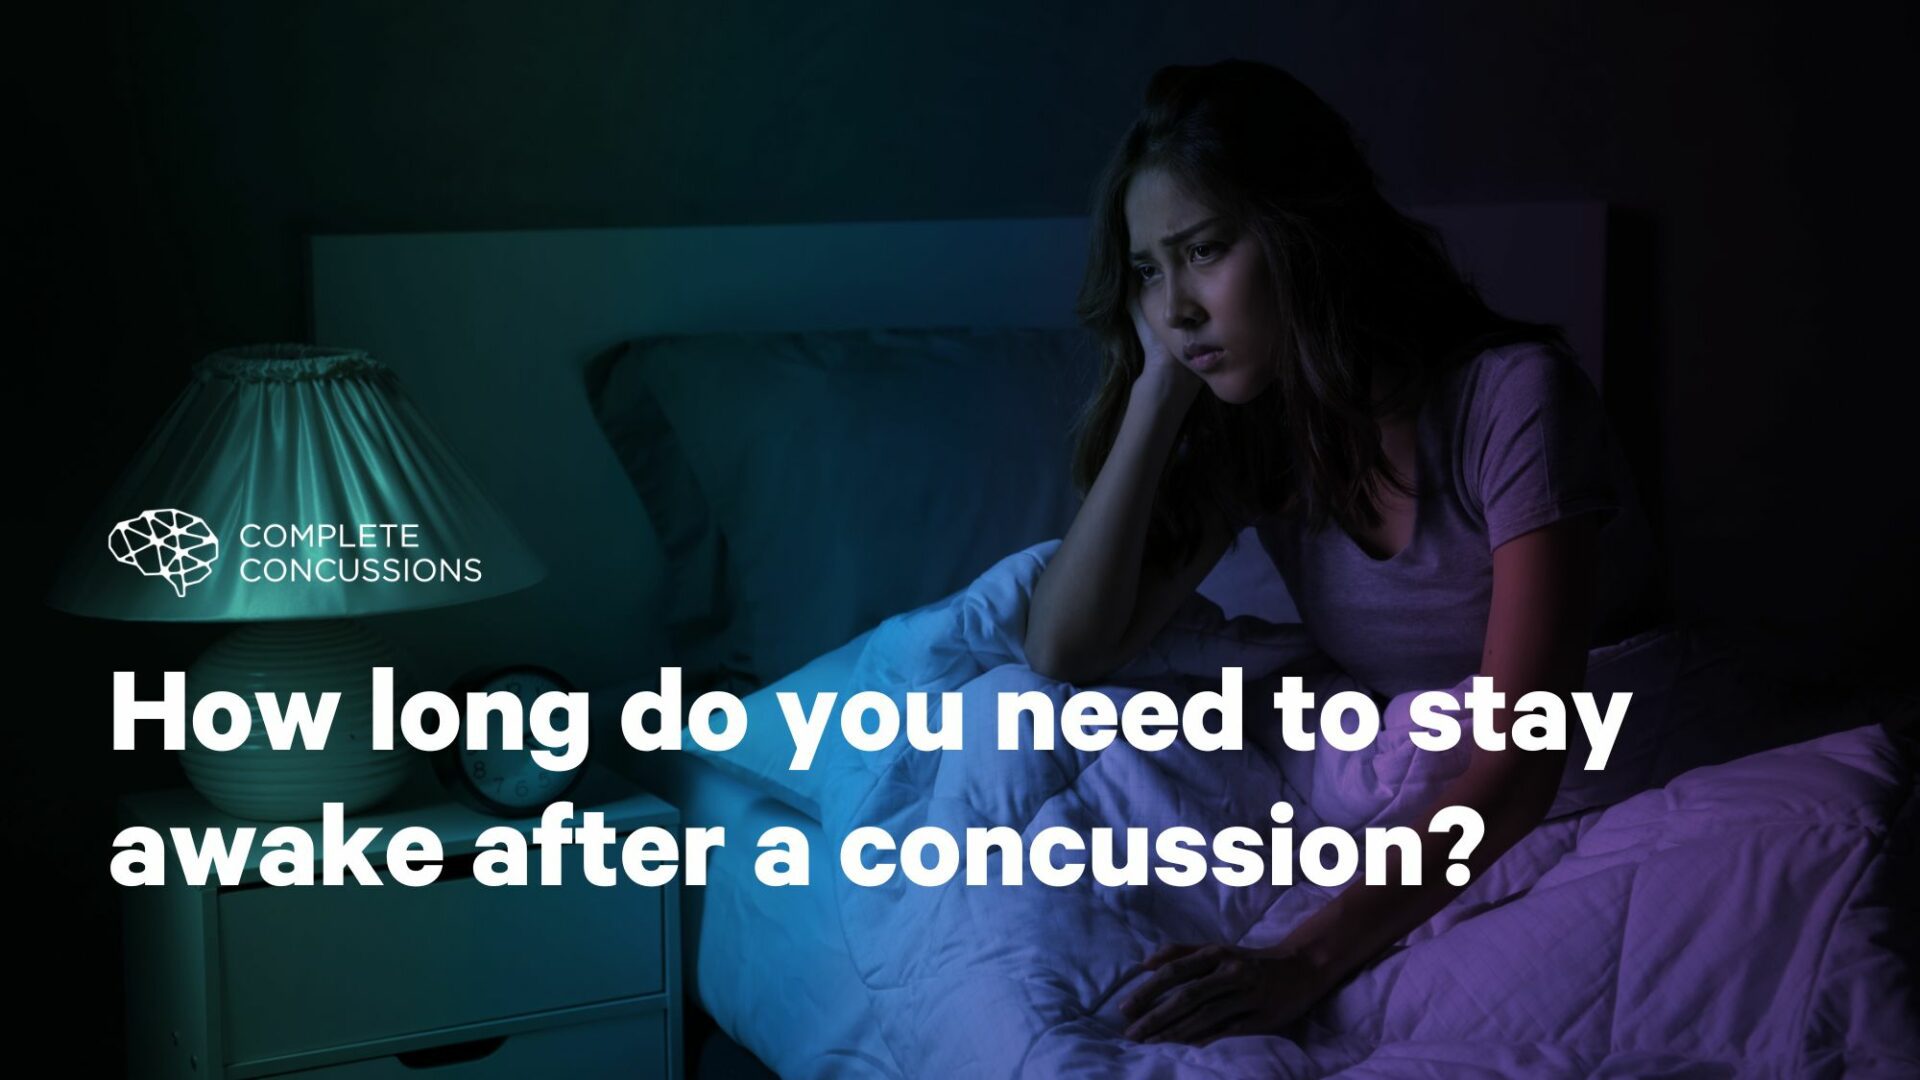 How long do you need to stay awake after a concussion?